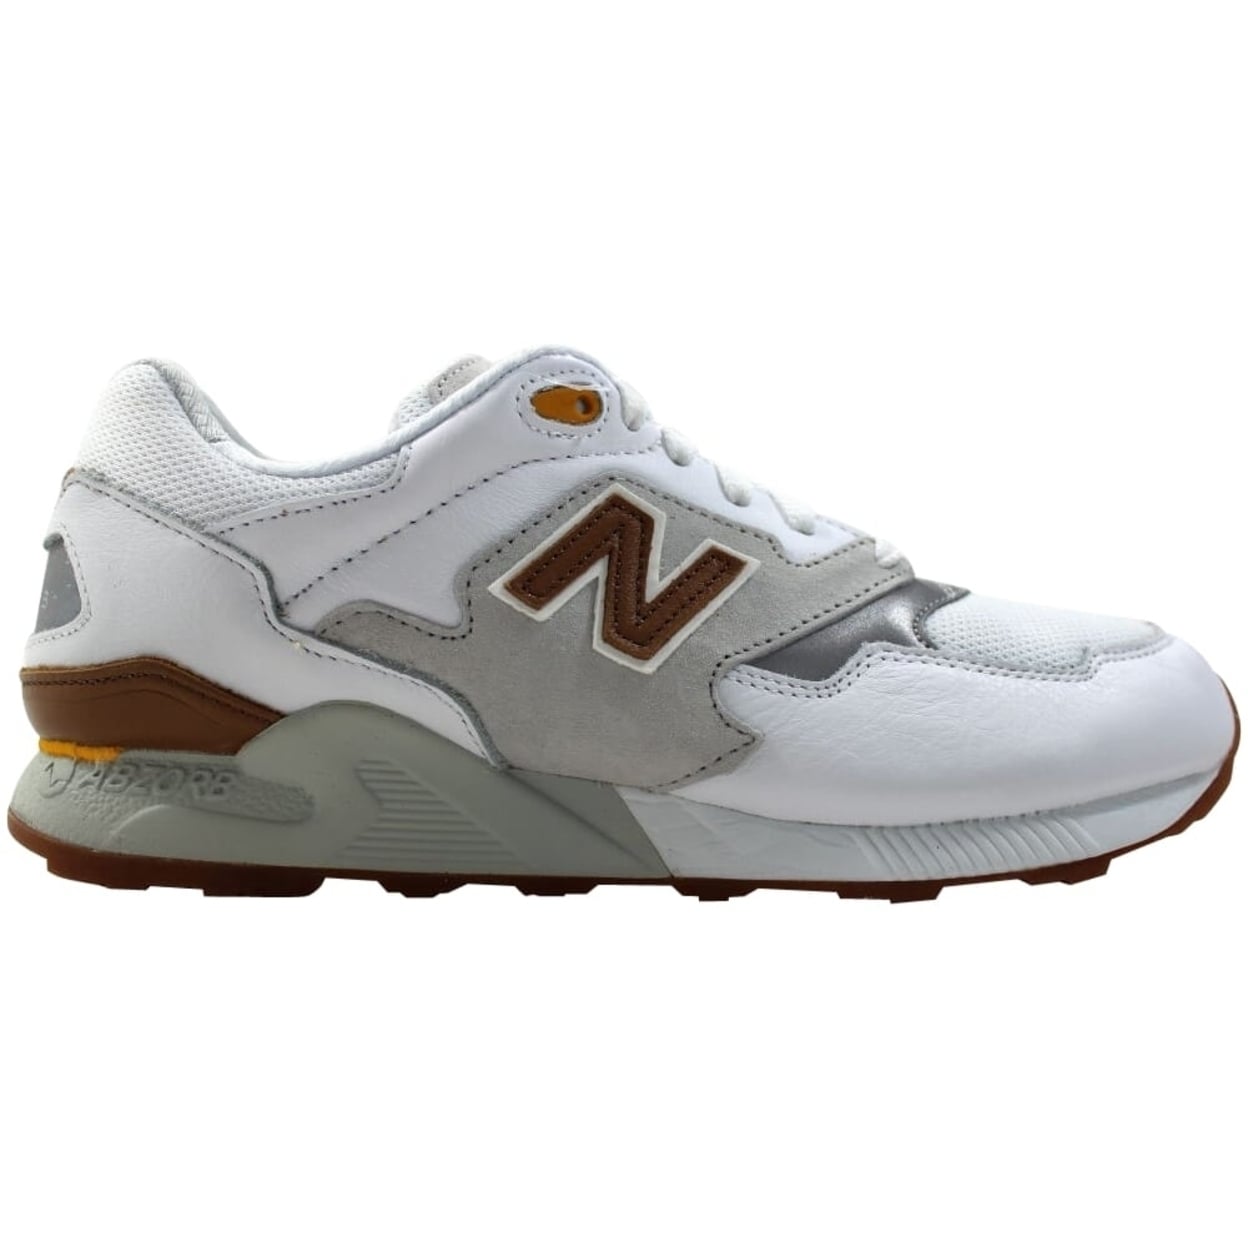 new balance shoes for working on concrete